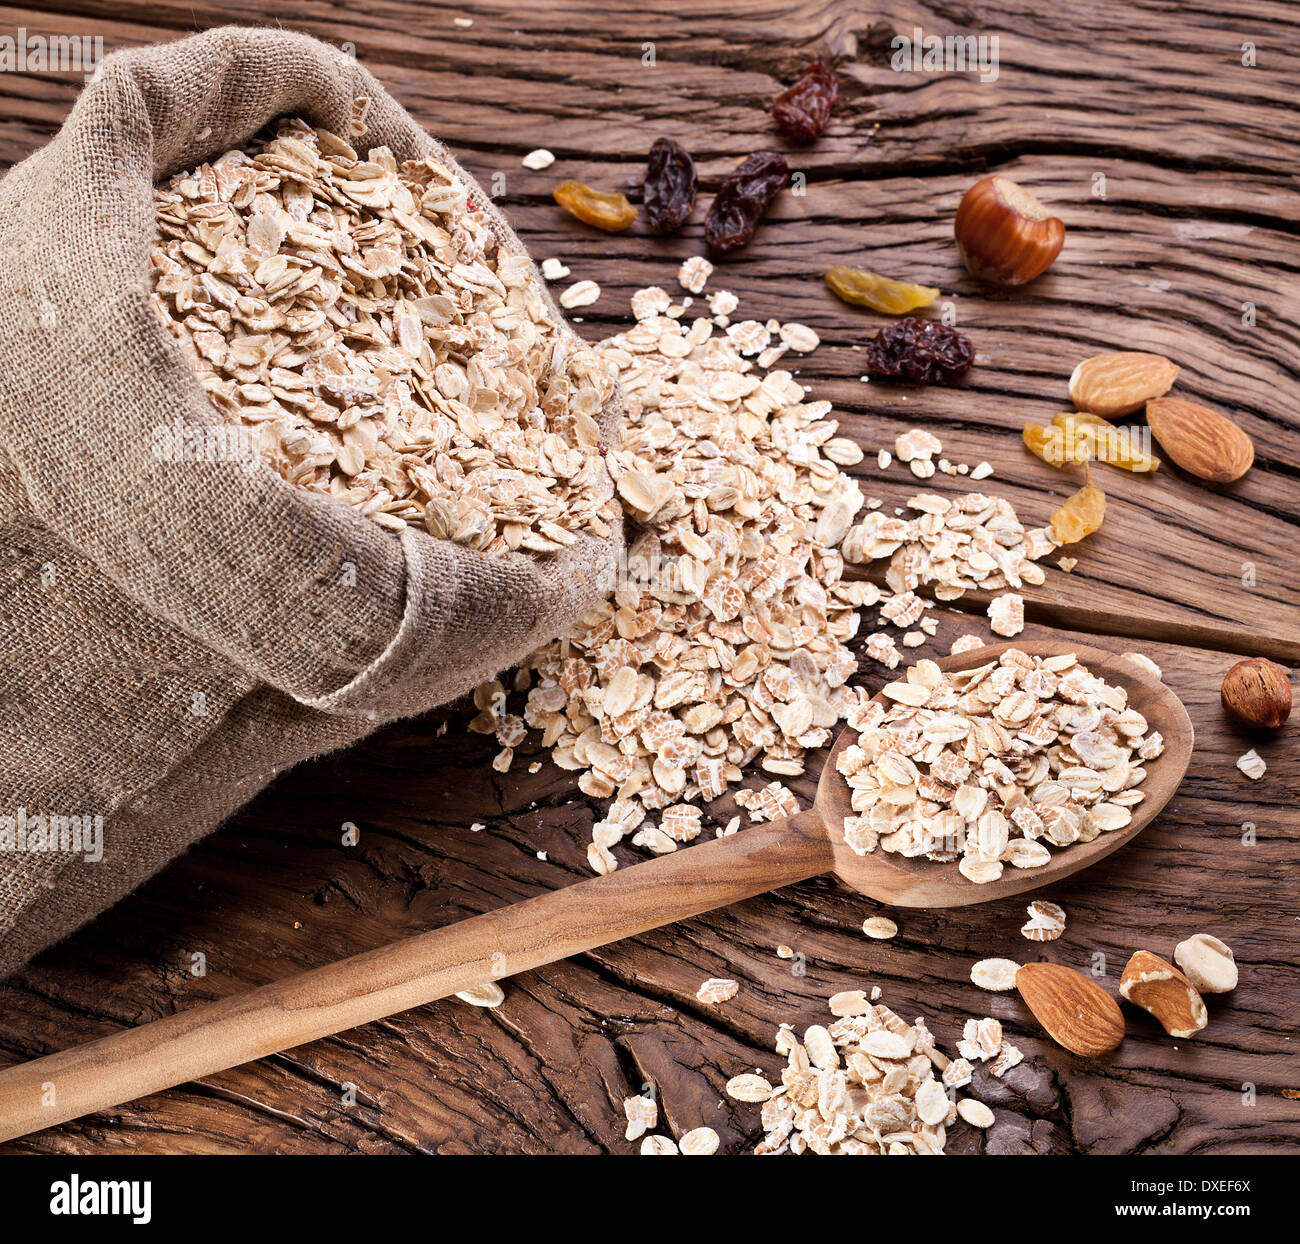 Rolled oats in the sack on old wooden table. Stock Photo